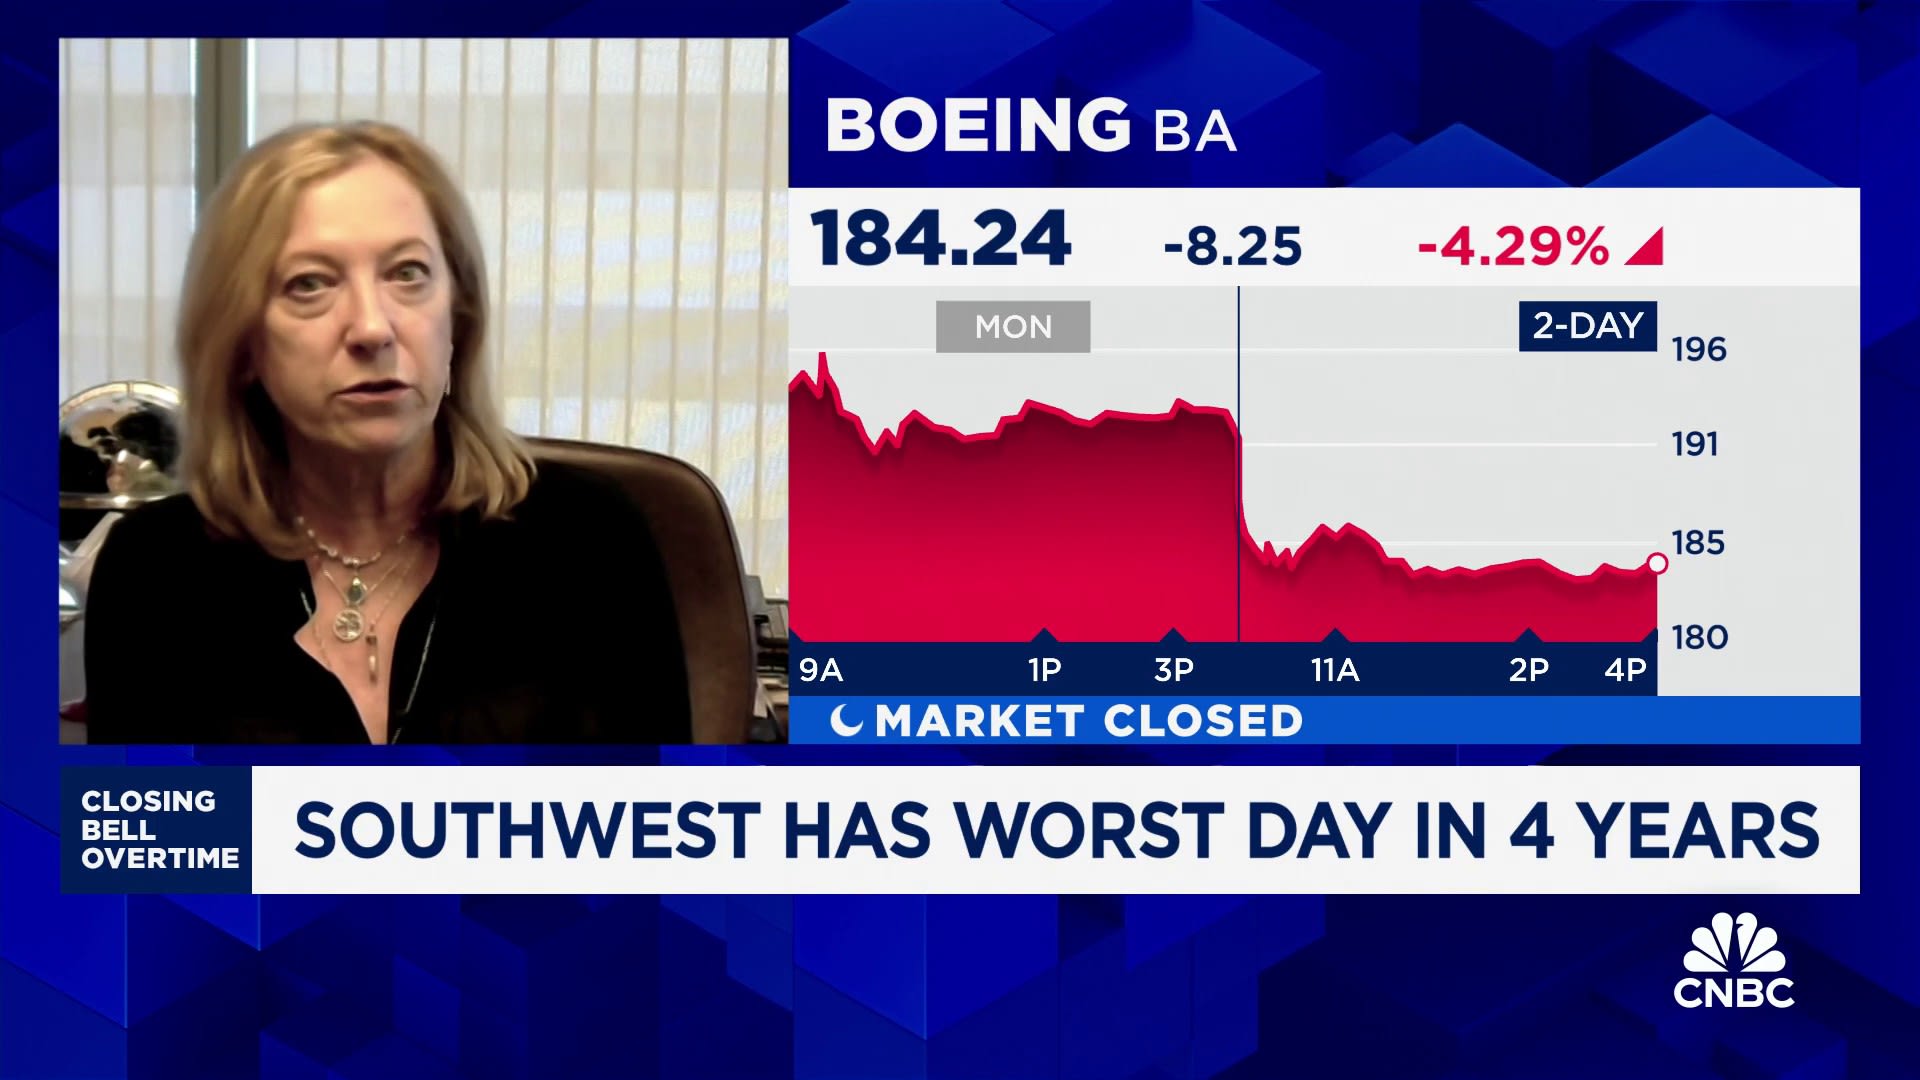 TD Cowen&#x27s Helane Becker talks Boeing&#x27s mounting troubles weighing on airline stocks